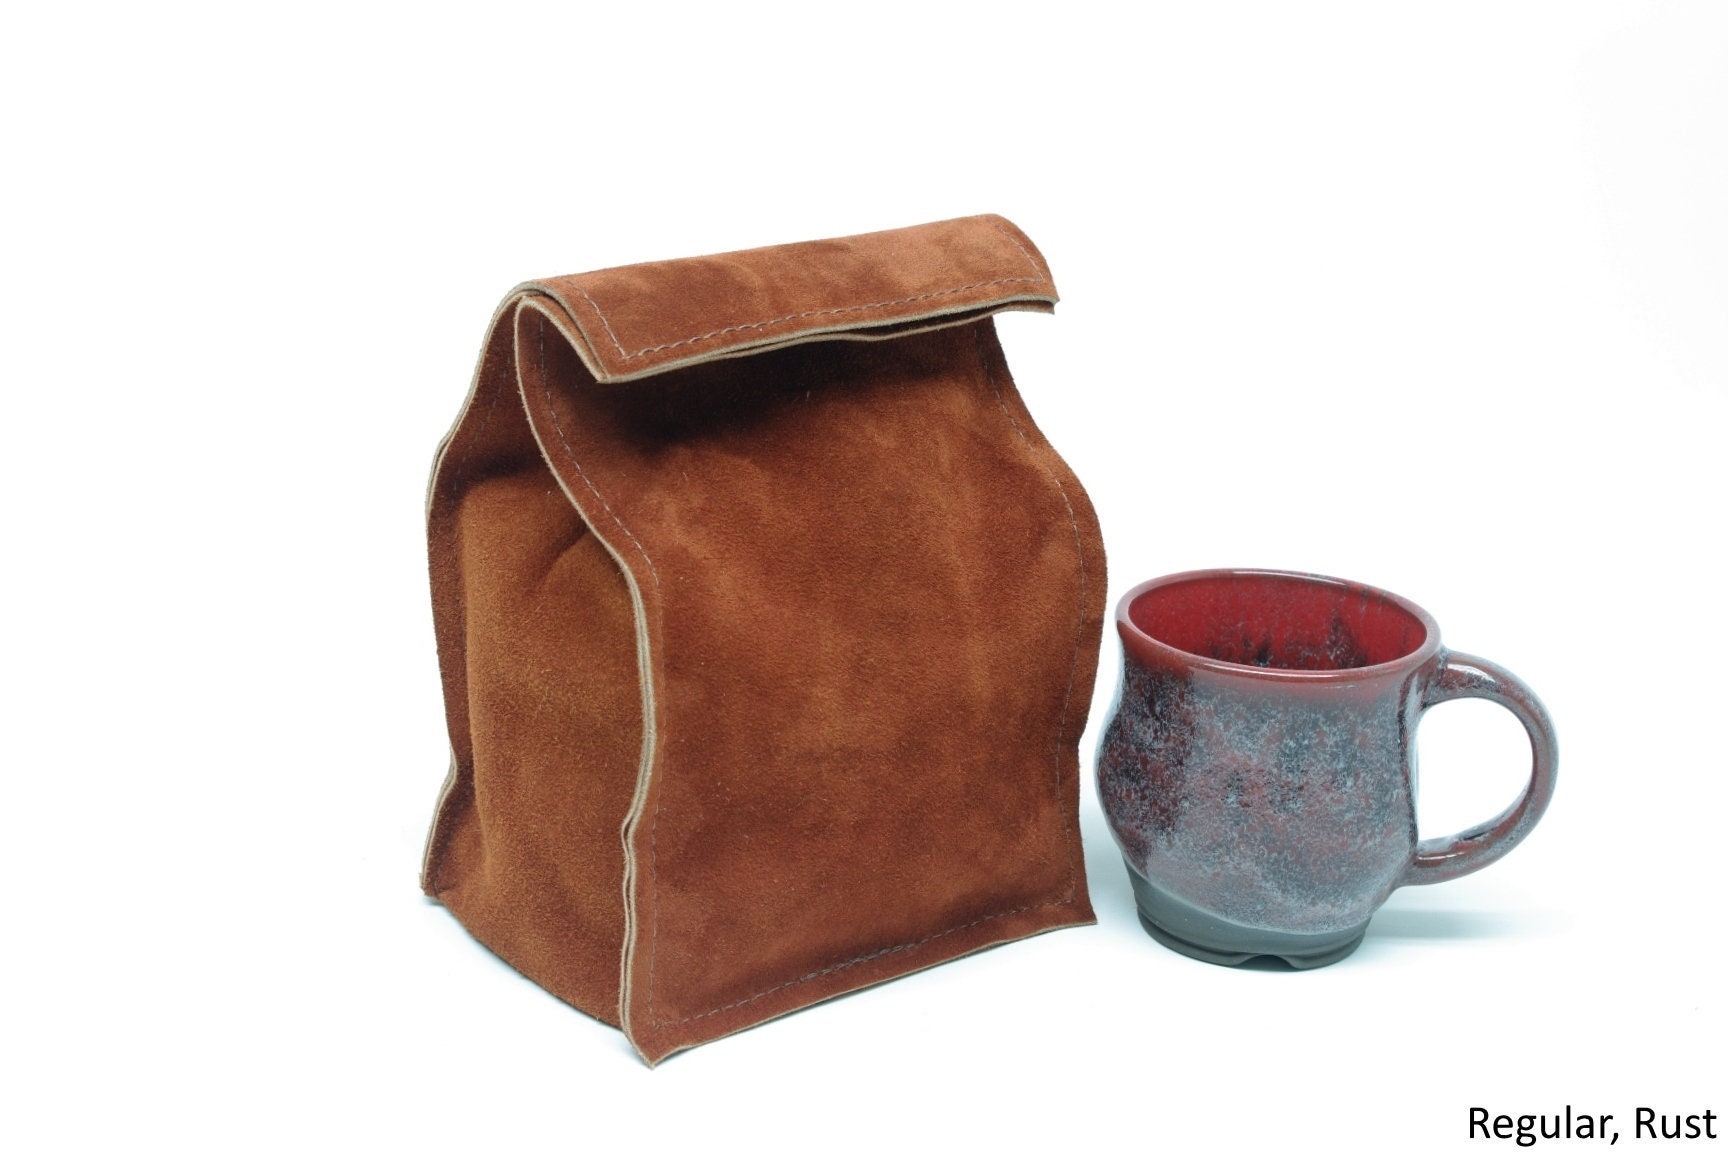 Leather Suede Lunch Bag